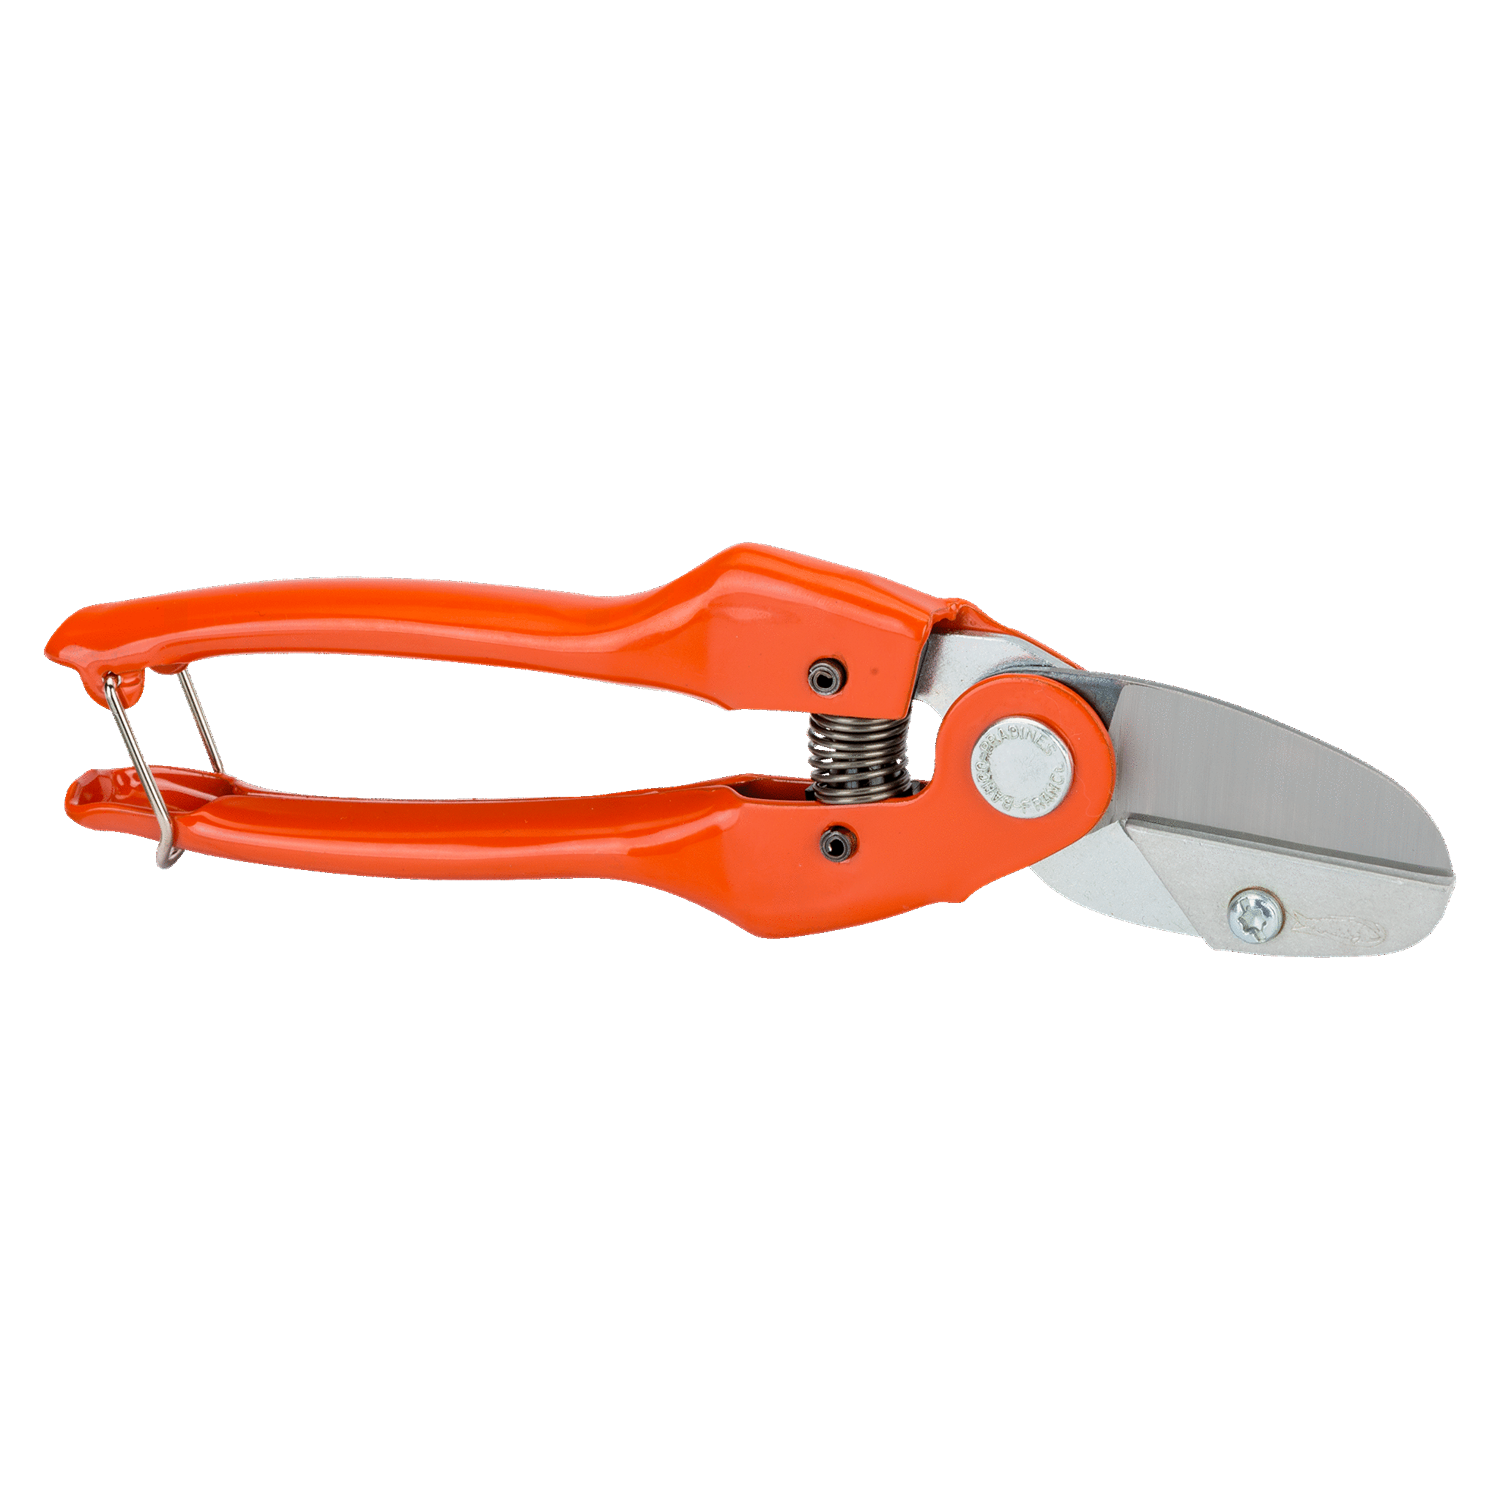 BAHCO P138 Anvil Secateurs with Stamped/Pressed Steel Handle - Premium Secateurs from BAHCO - Shop now at Yew Aik.